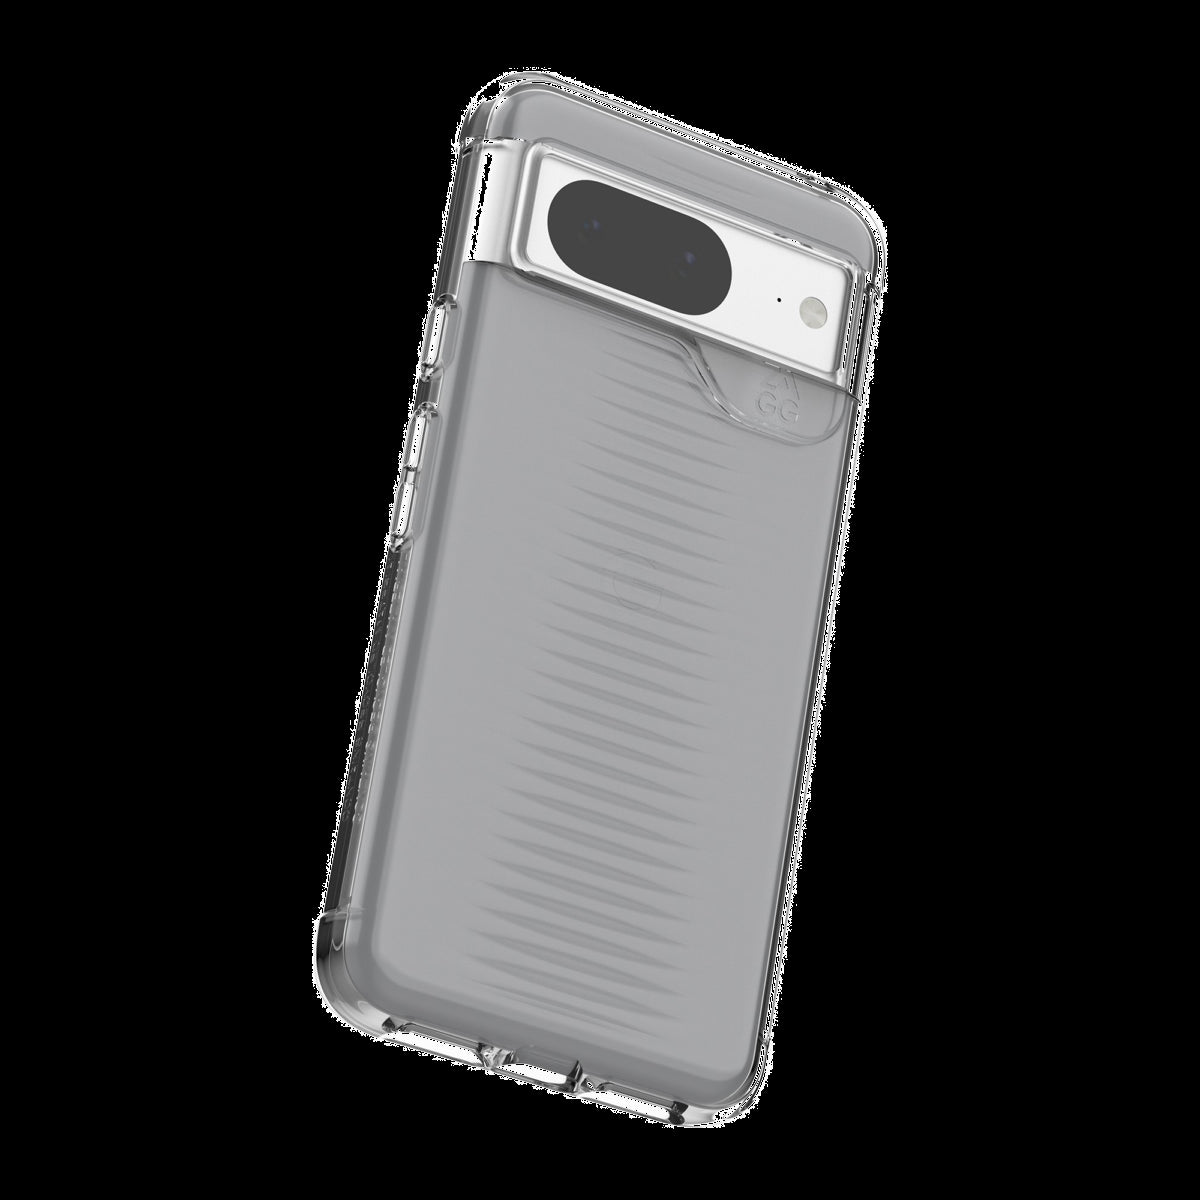 <p>Strengthened with Graphene, ZAGG's Luxe case offers a lightweight, stylish profile that delivers up to 10 ft drop protection.</p>